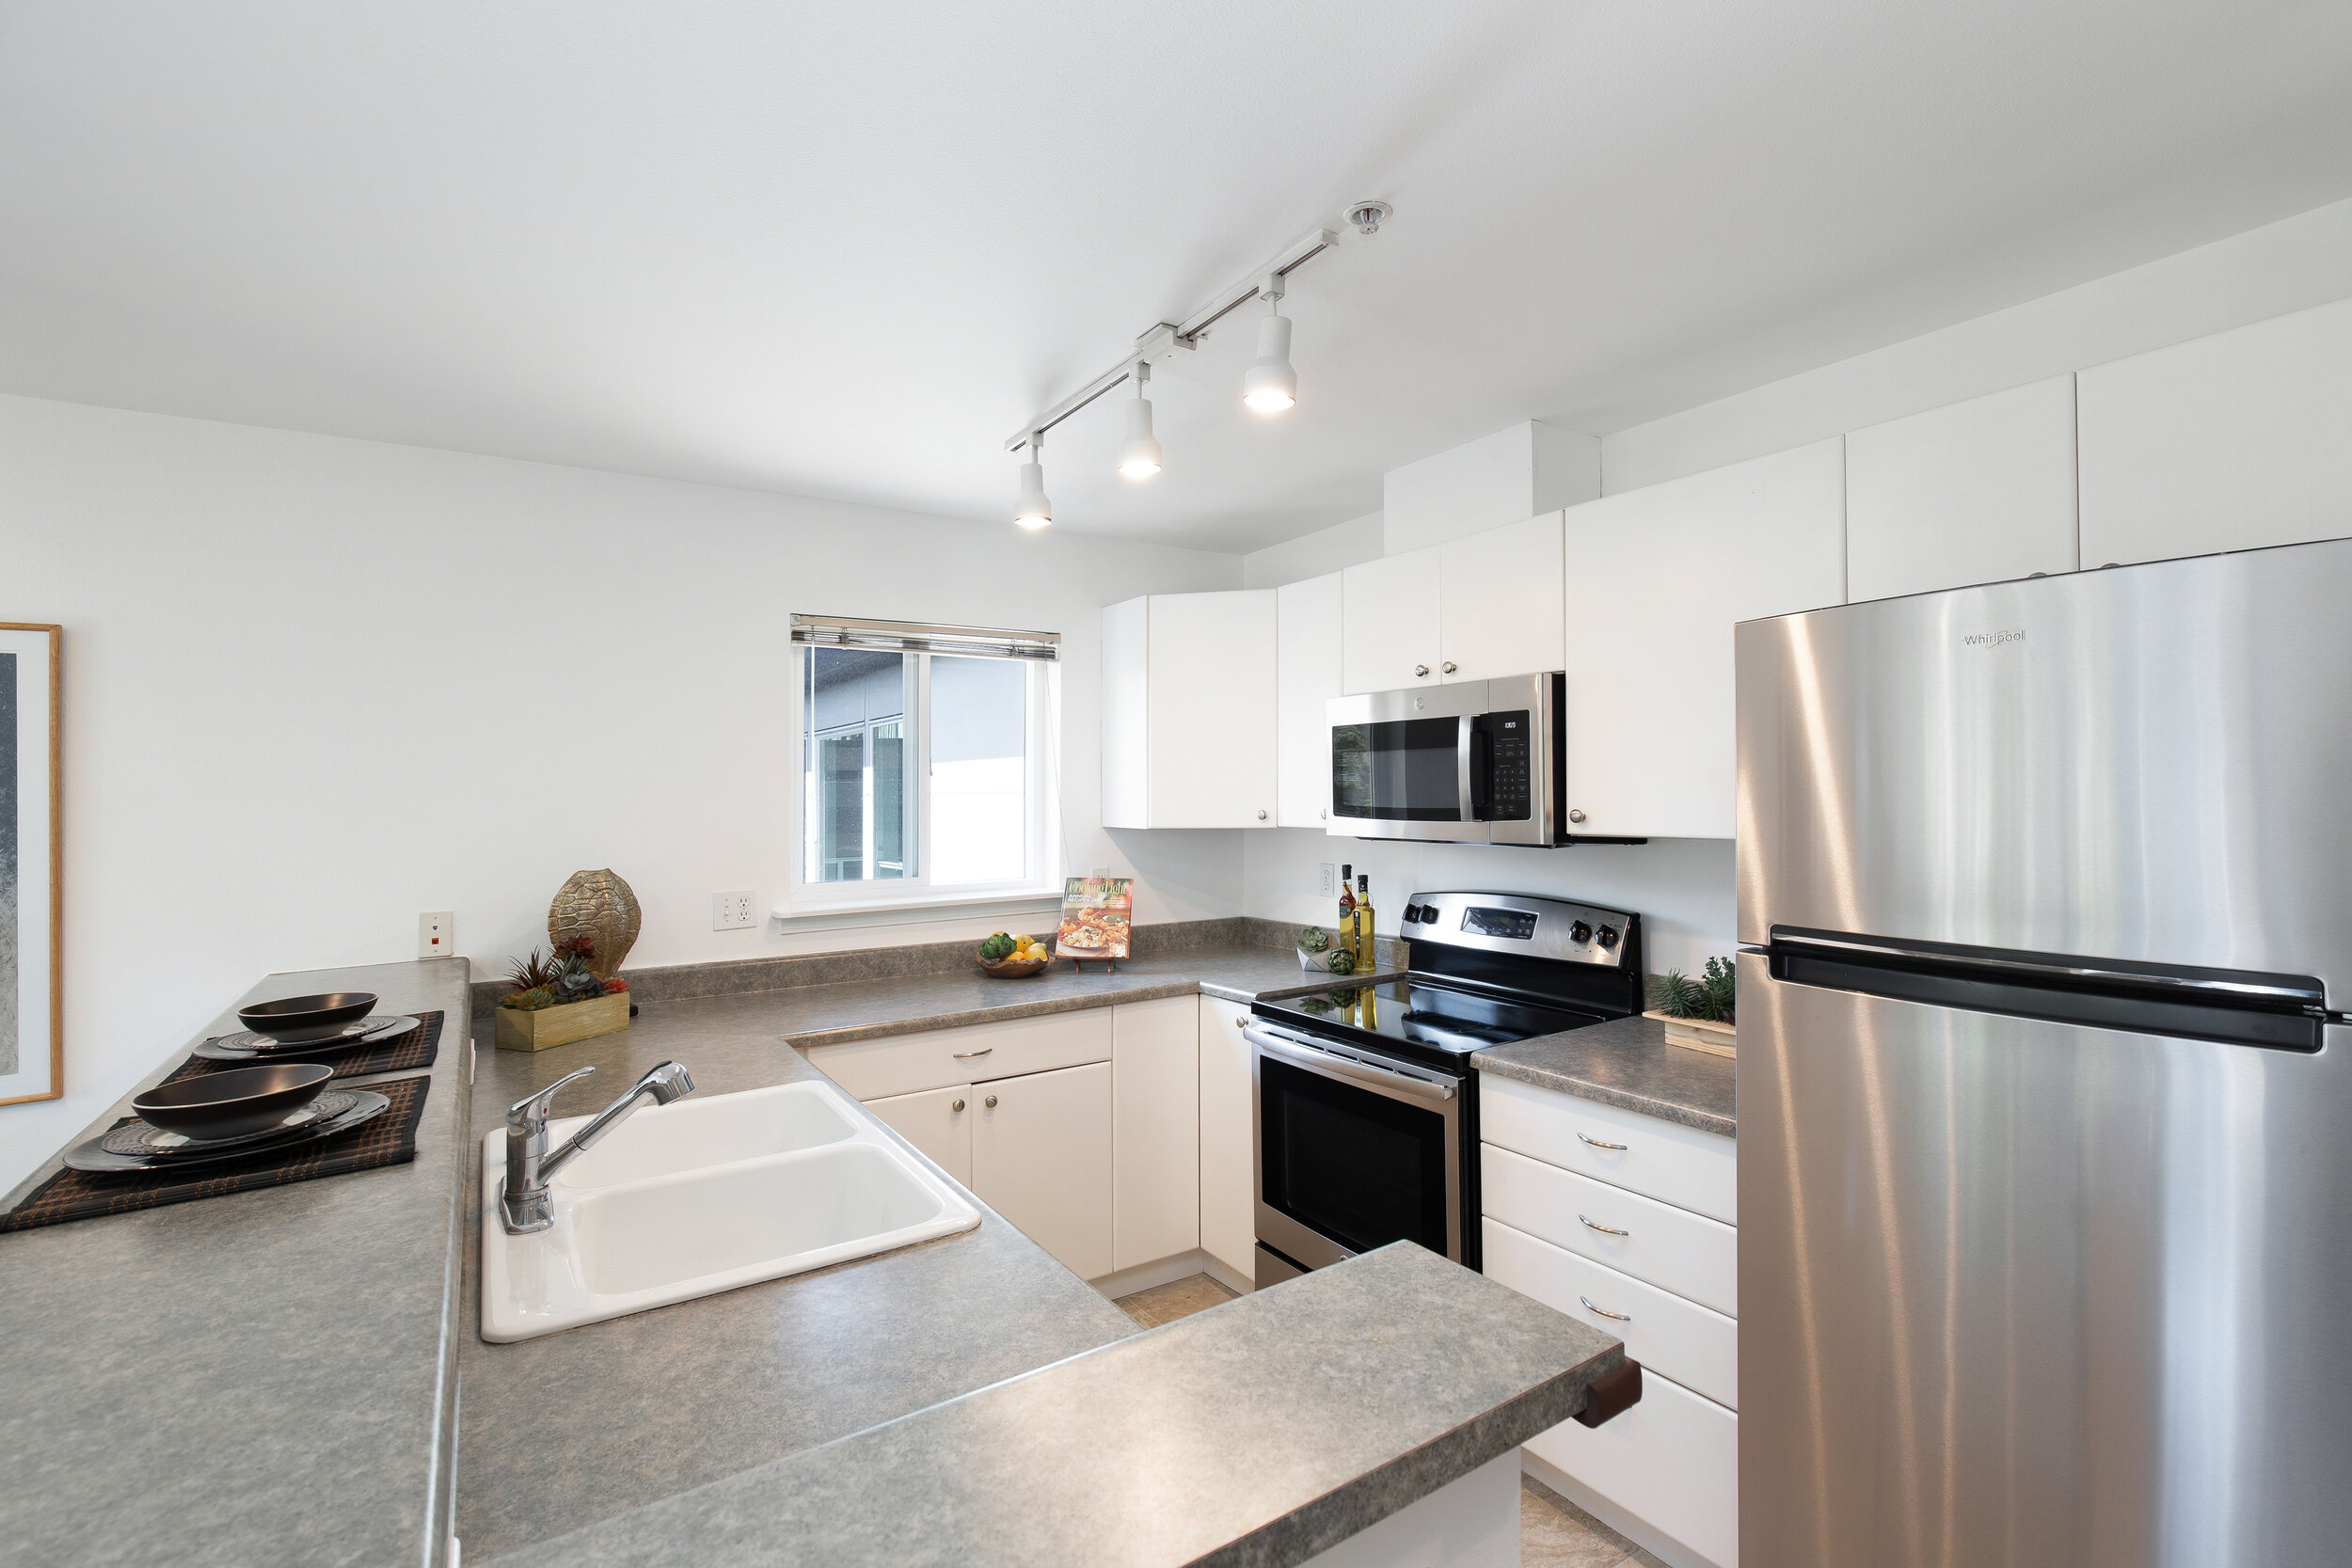  Abundant counter space and cabinetry and a new stainless steel refrigerator and microwave. 